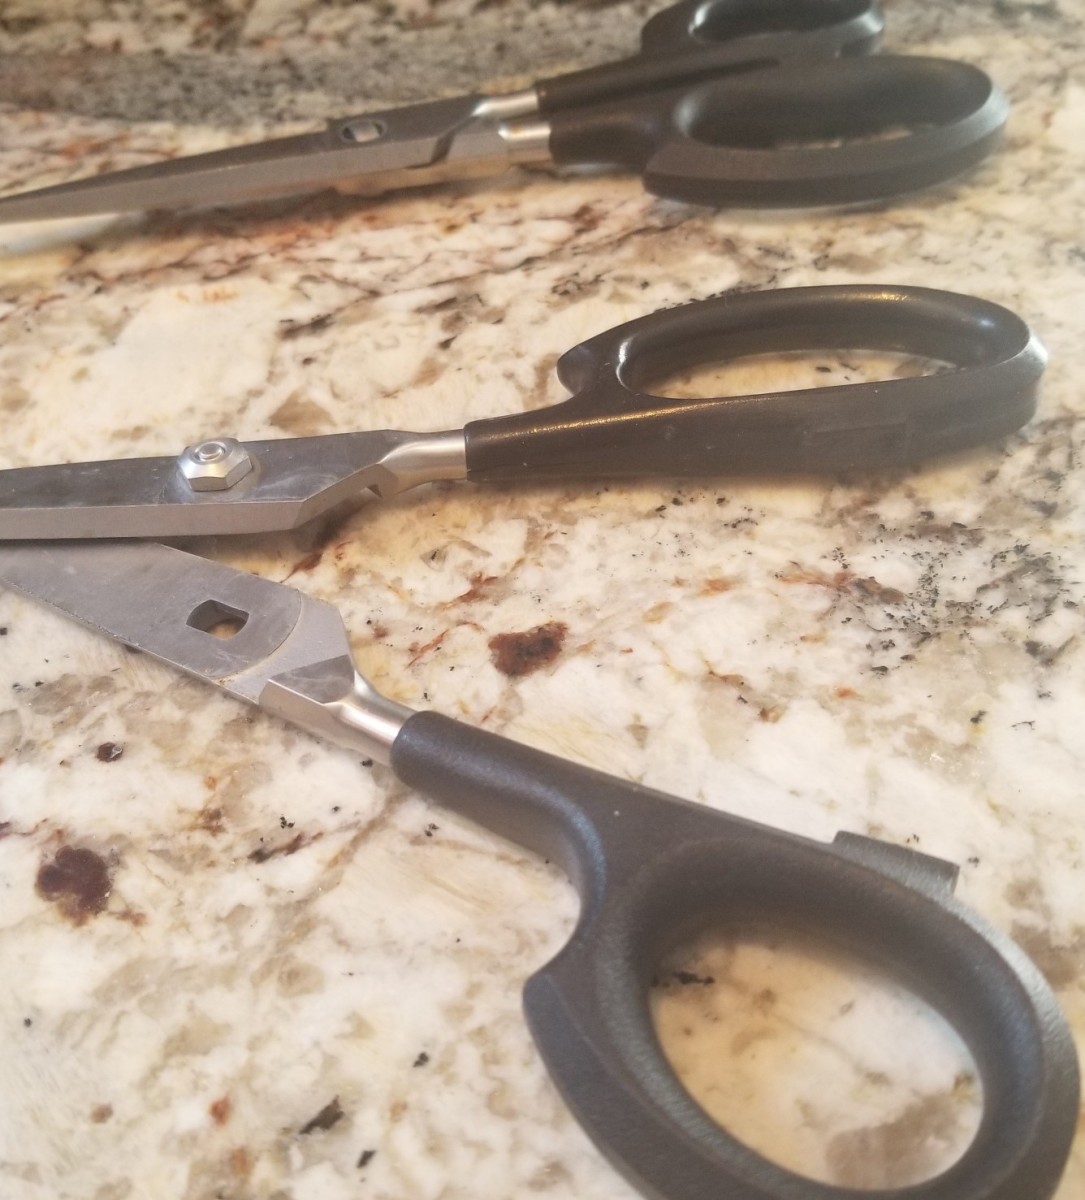 I have two pairs of Cutco Super Shears. Here is one pair separated for cleaning alongside a pair that is ready to cut.